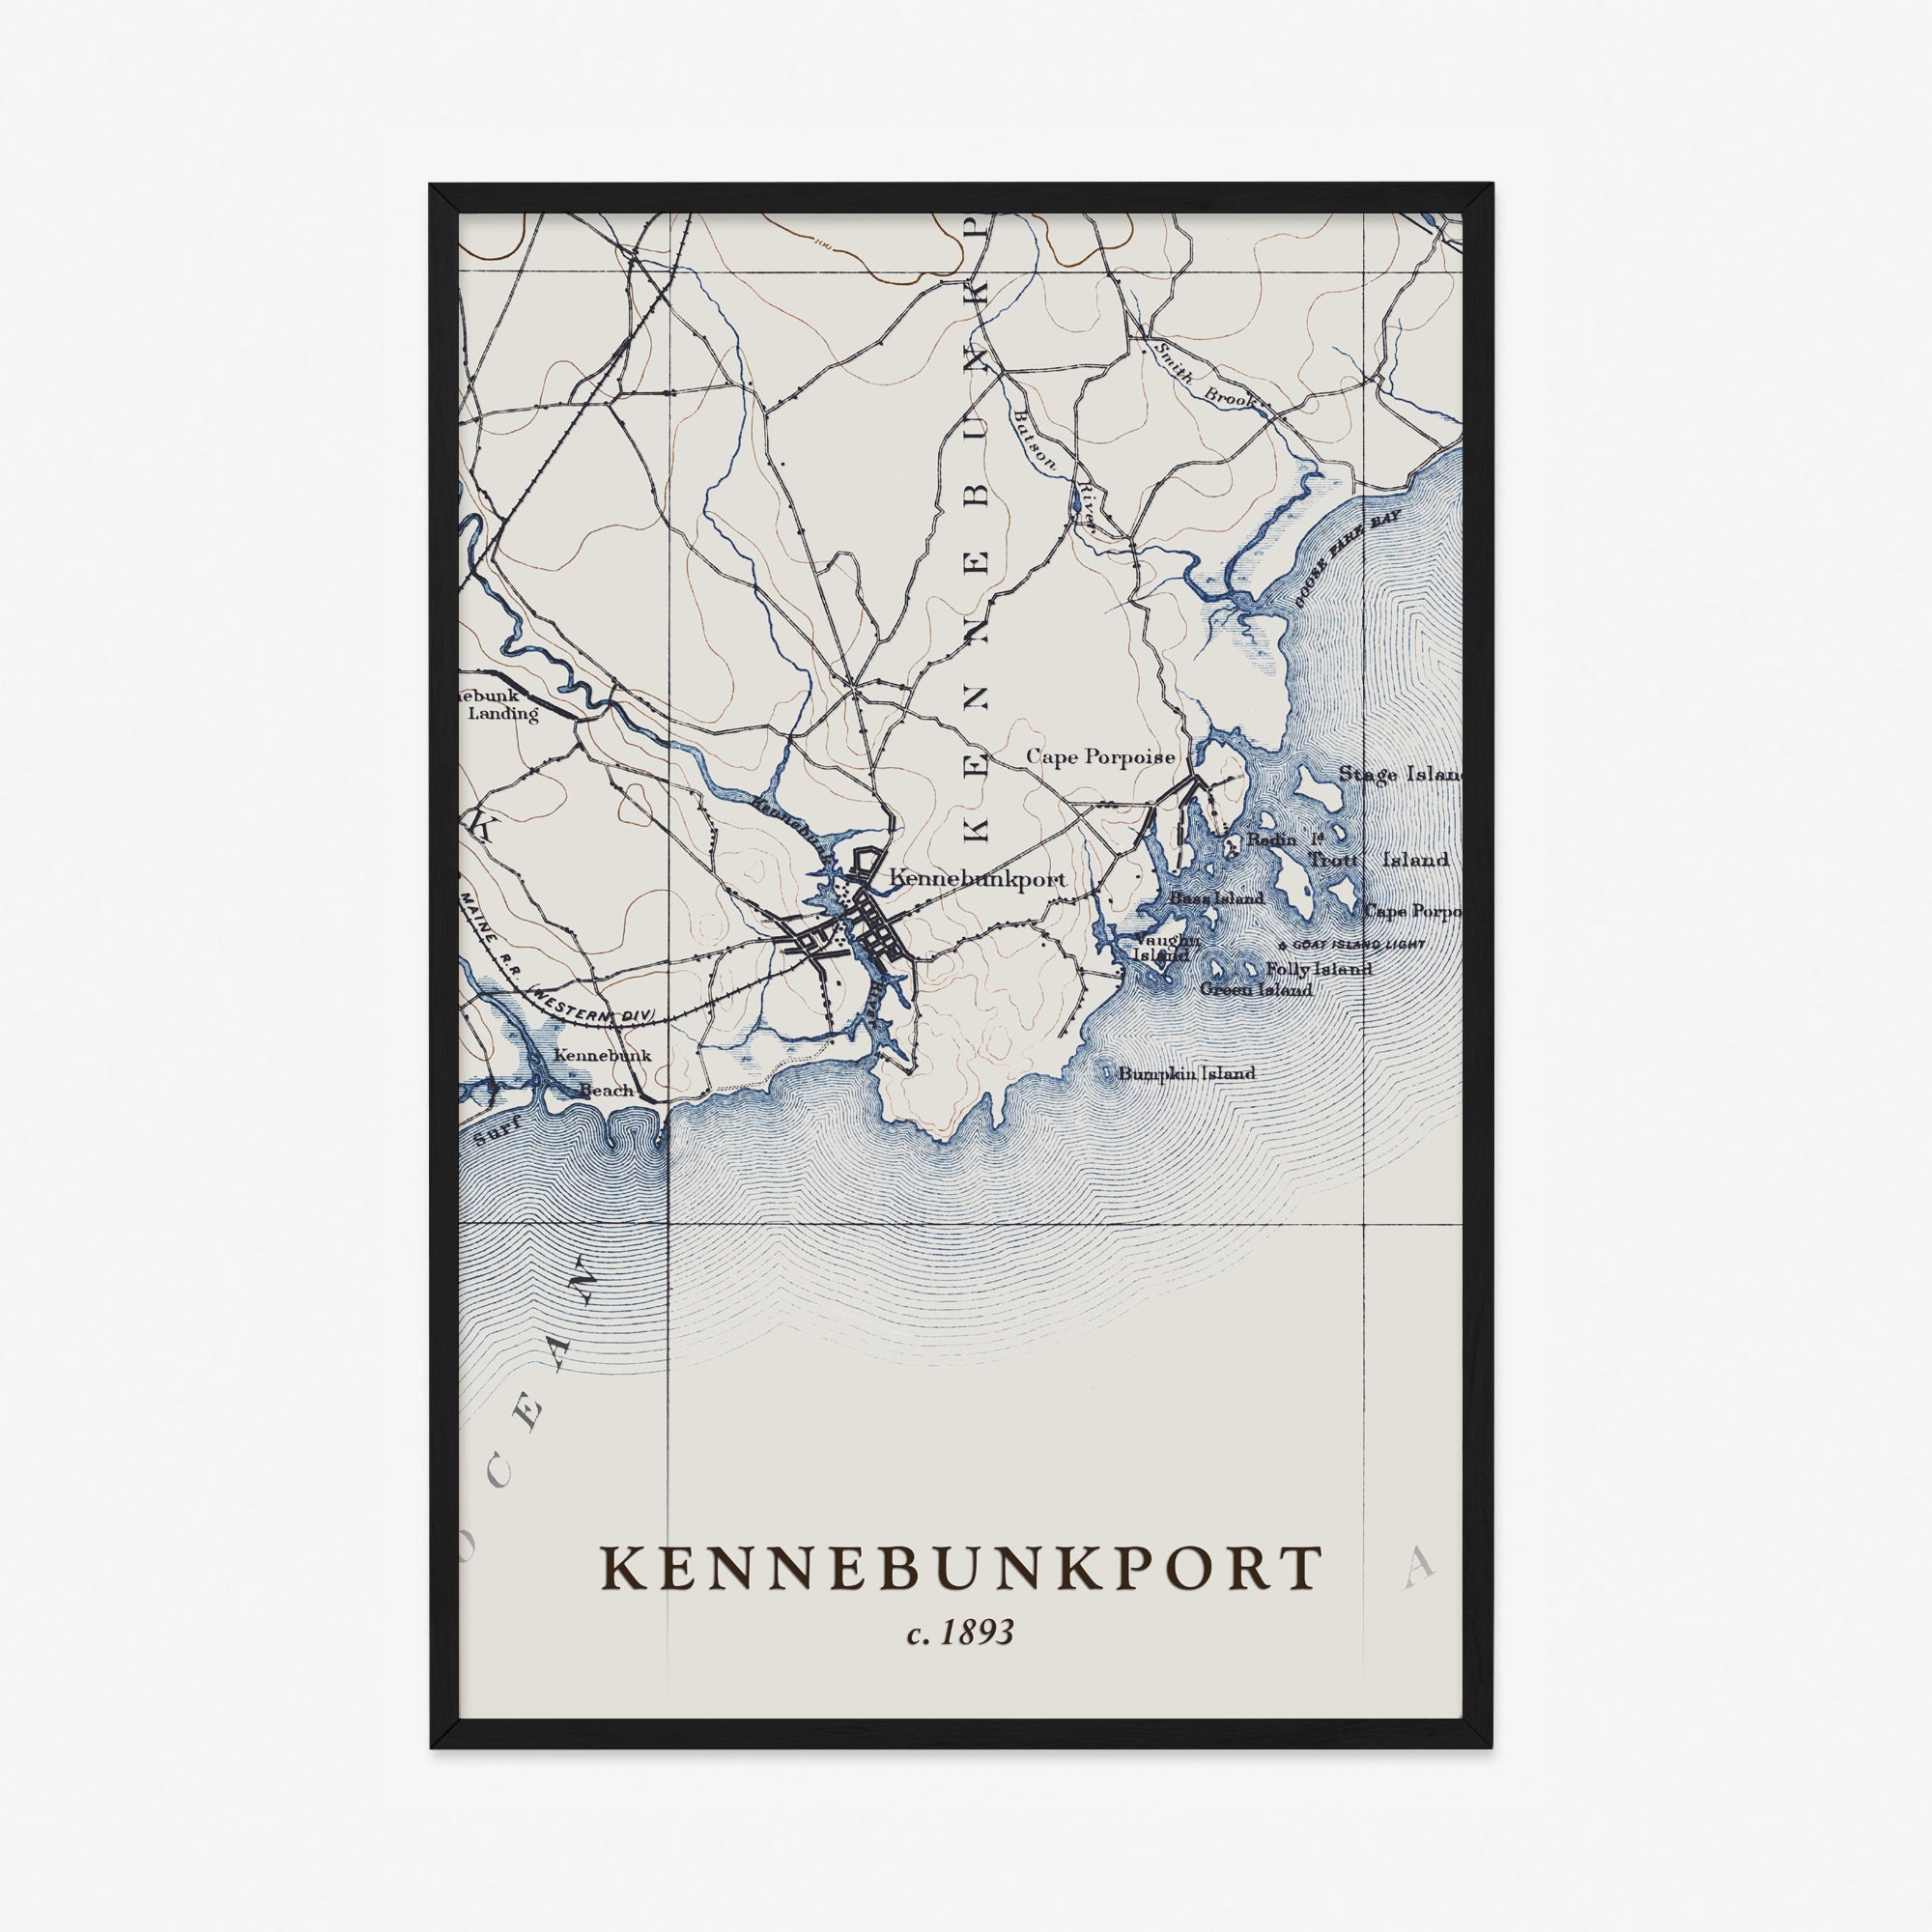 Kennebunkport, ME - 1893 Topographic Map